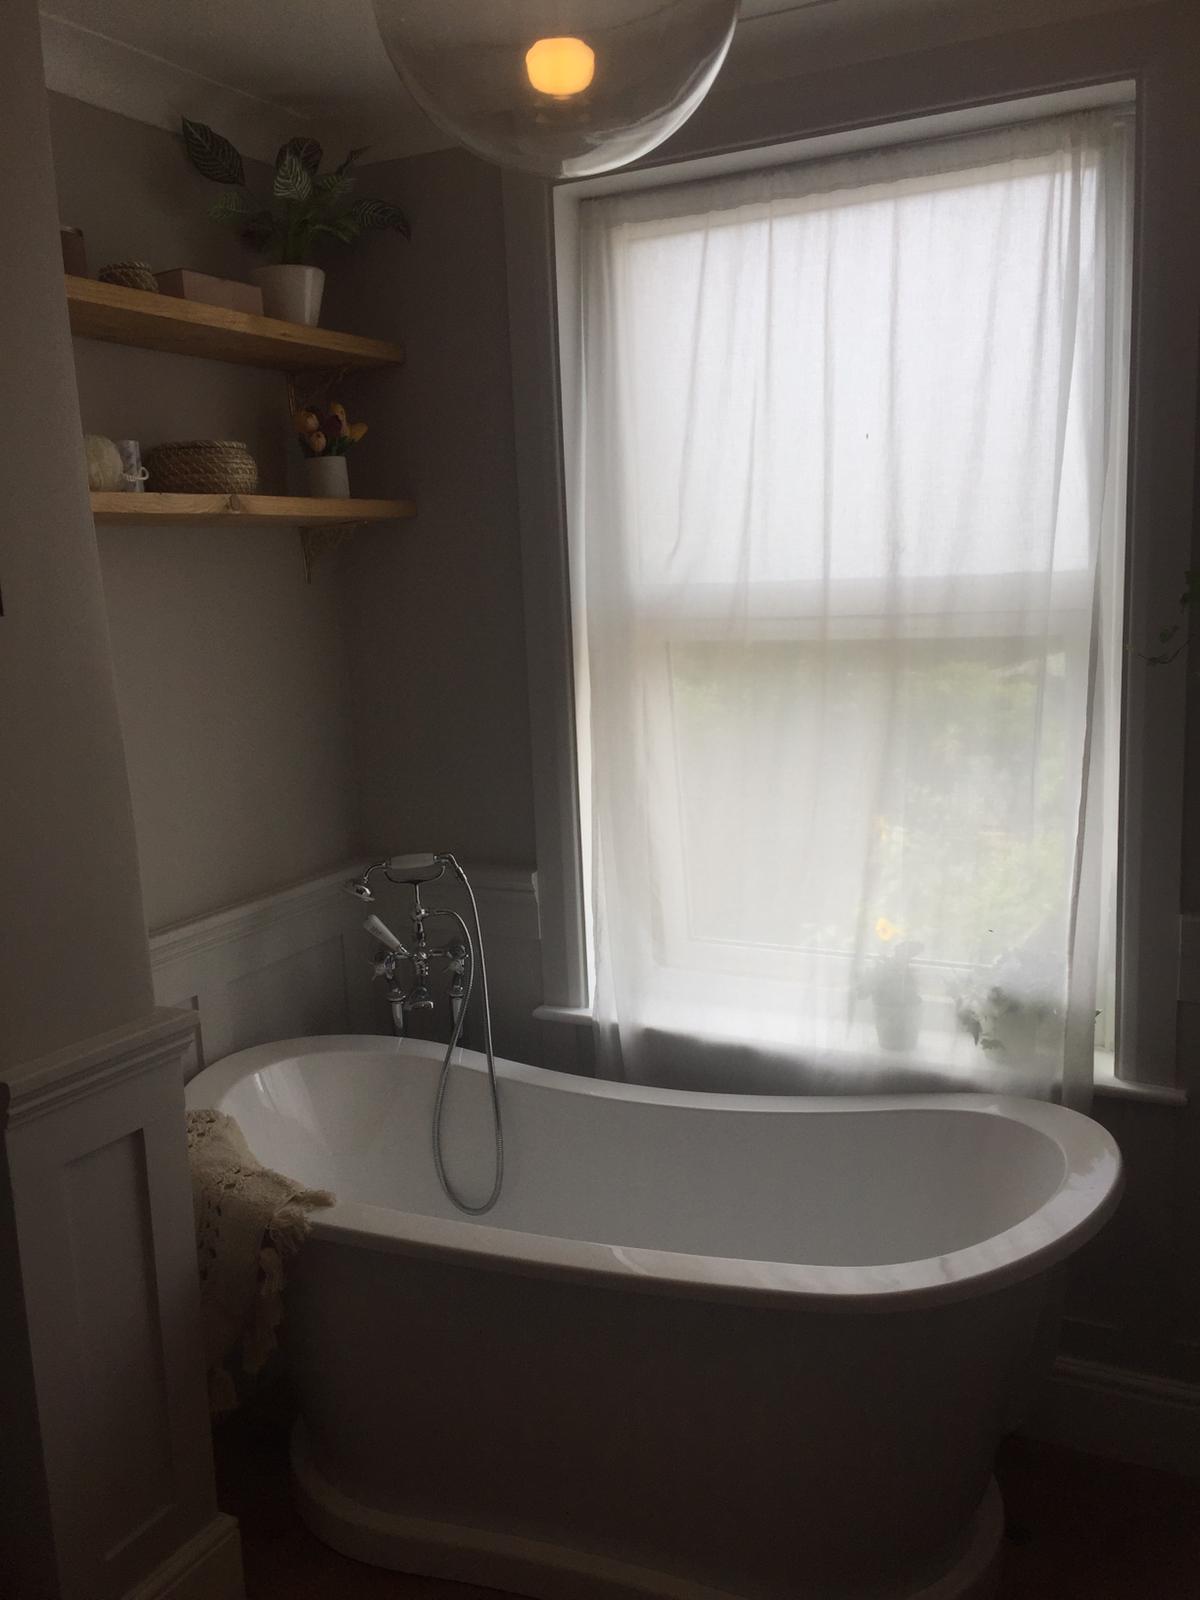 Art deco bath by a large sash window and two wooden shelves above the bath.